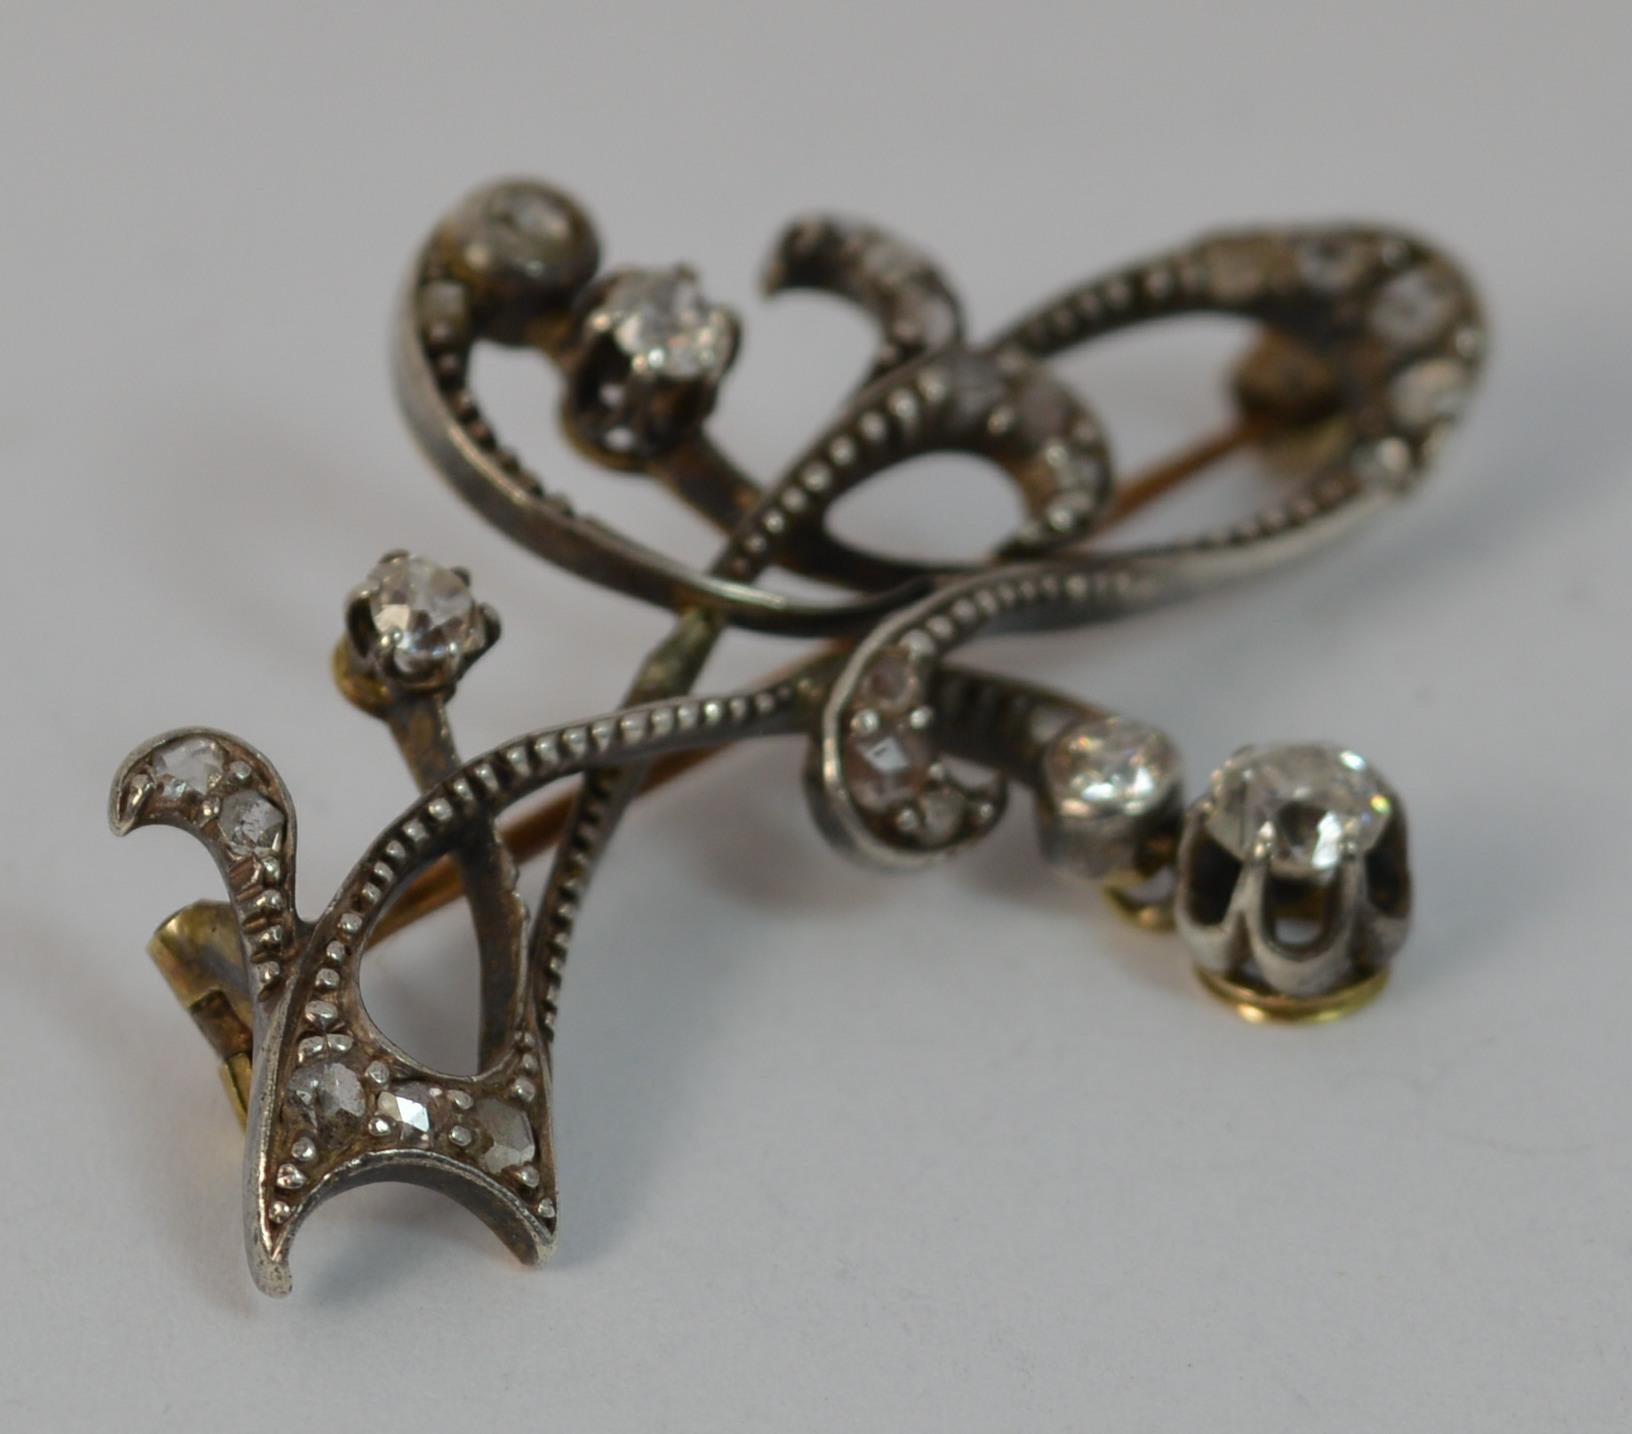 
A very stylish ladies art nouveau period brooch.

Solid 15 carat rose gold example with silver head setting, typical of the period.

Set with old and rose cut diamonds throughout to total approx 0.85 carats. 

Currently a brooch but could be